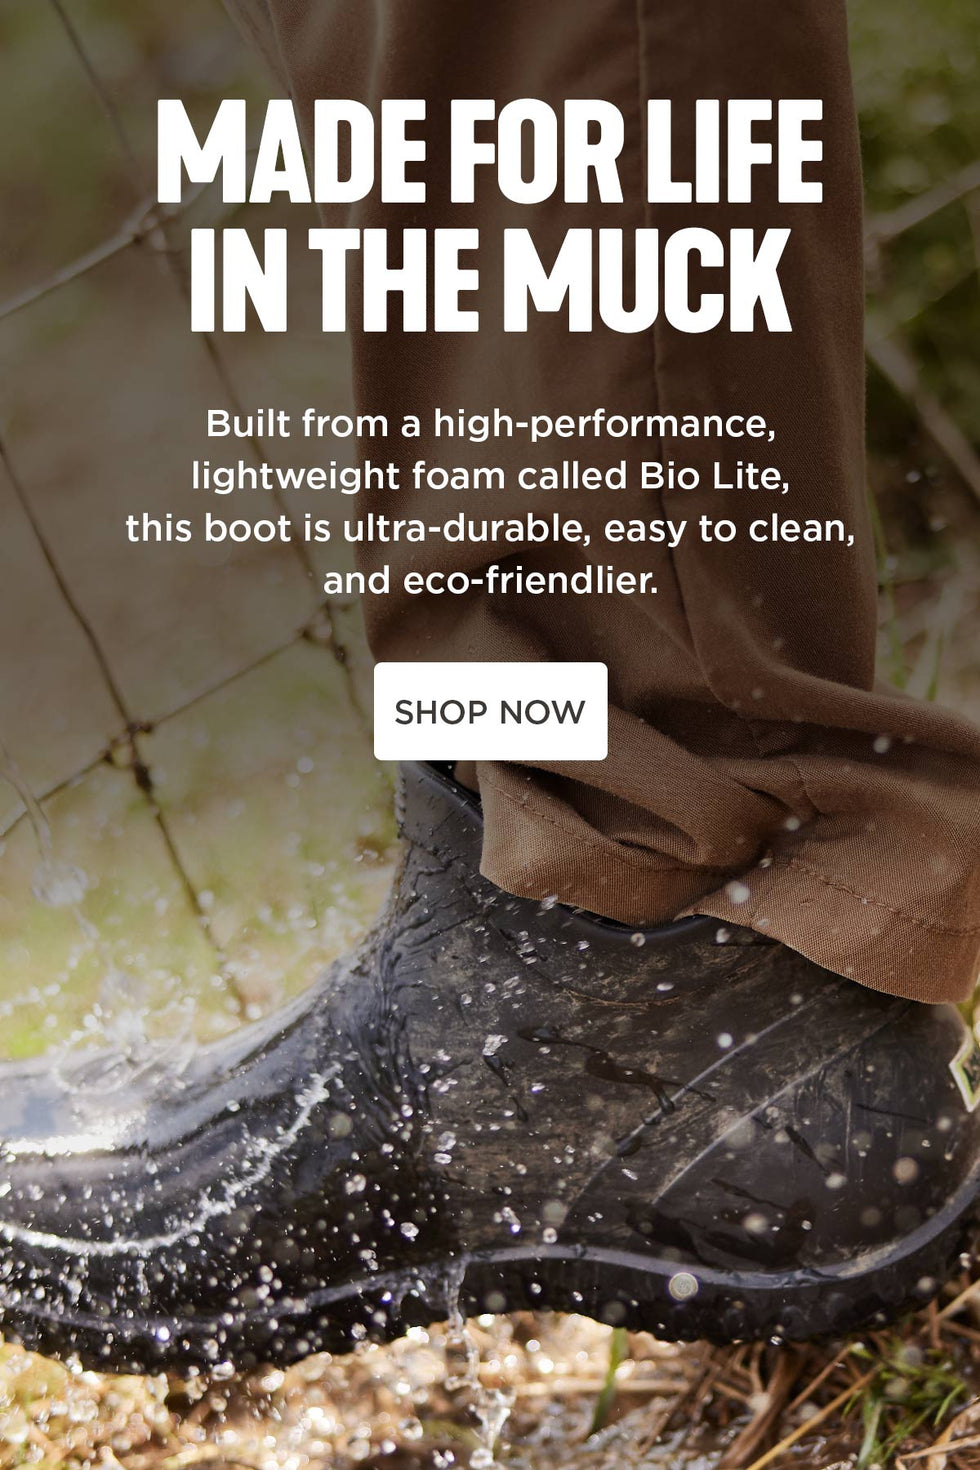 MADE FOR LIFE IN THE MUCK. Built from a high-performance, lightweight foam called Bio Lite, this boot is ultra-durable, easy to clean, and eco-friendlier. SHOP NOW